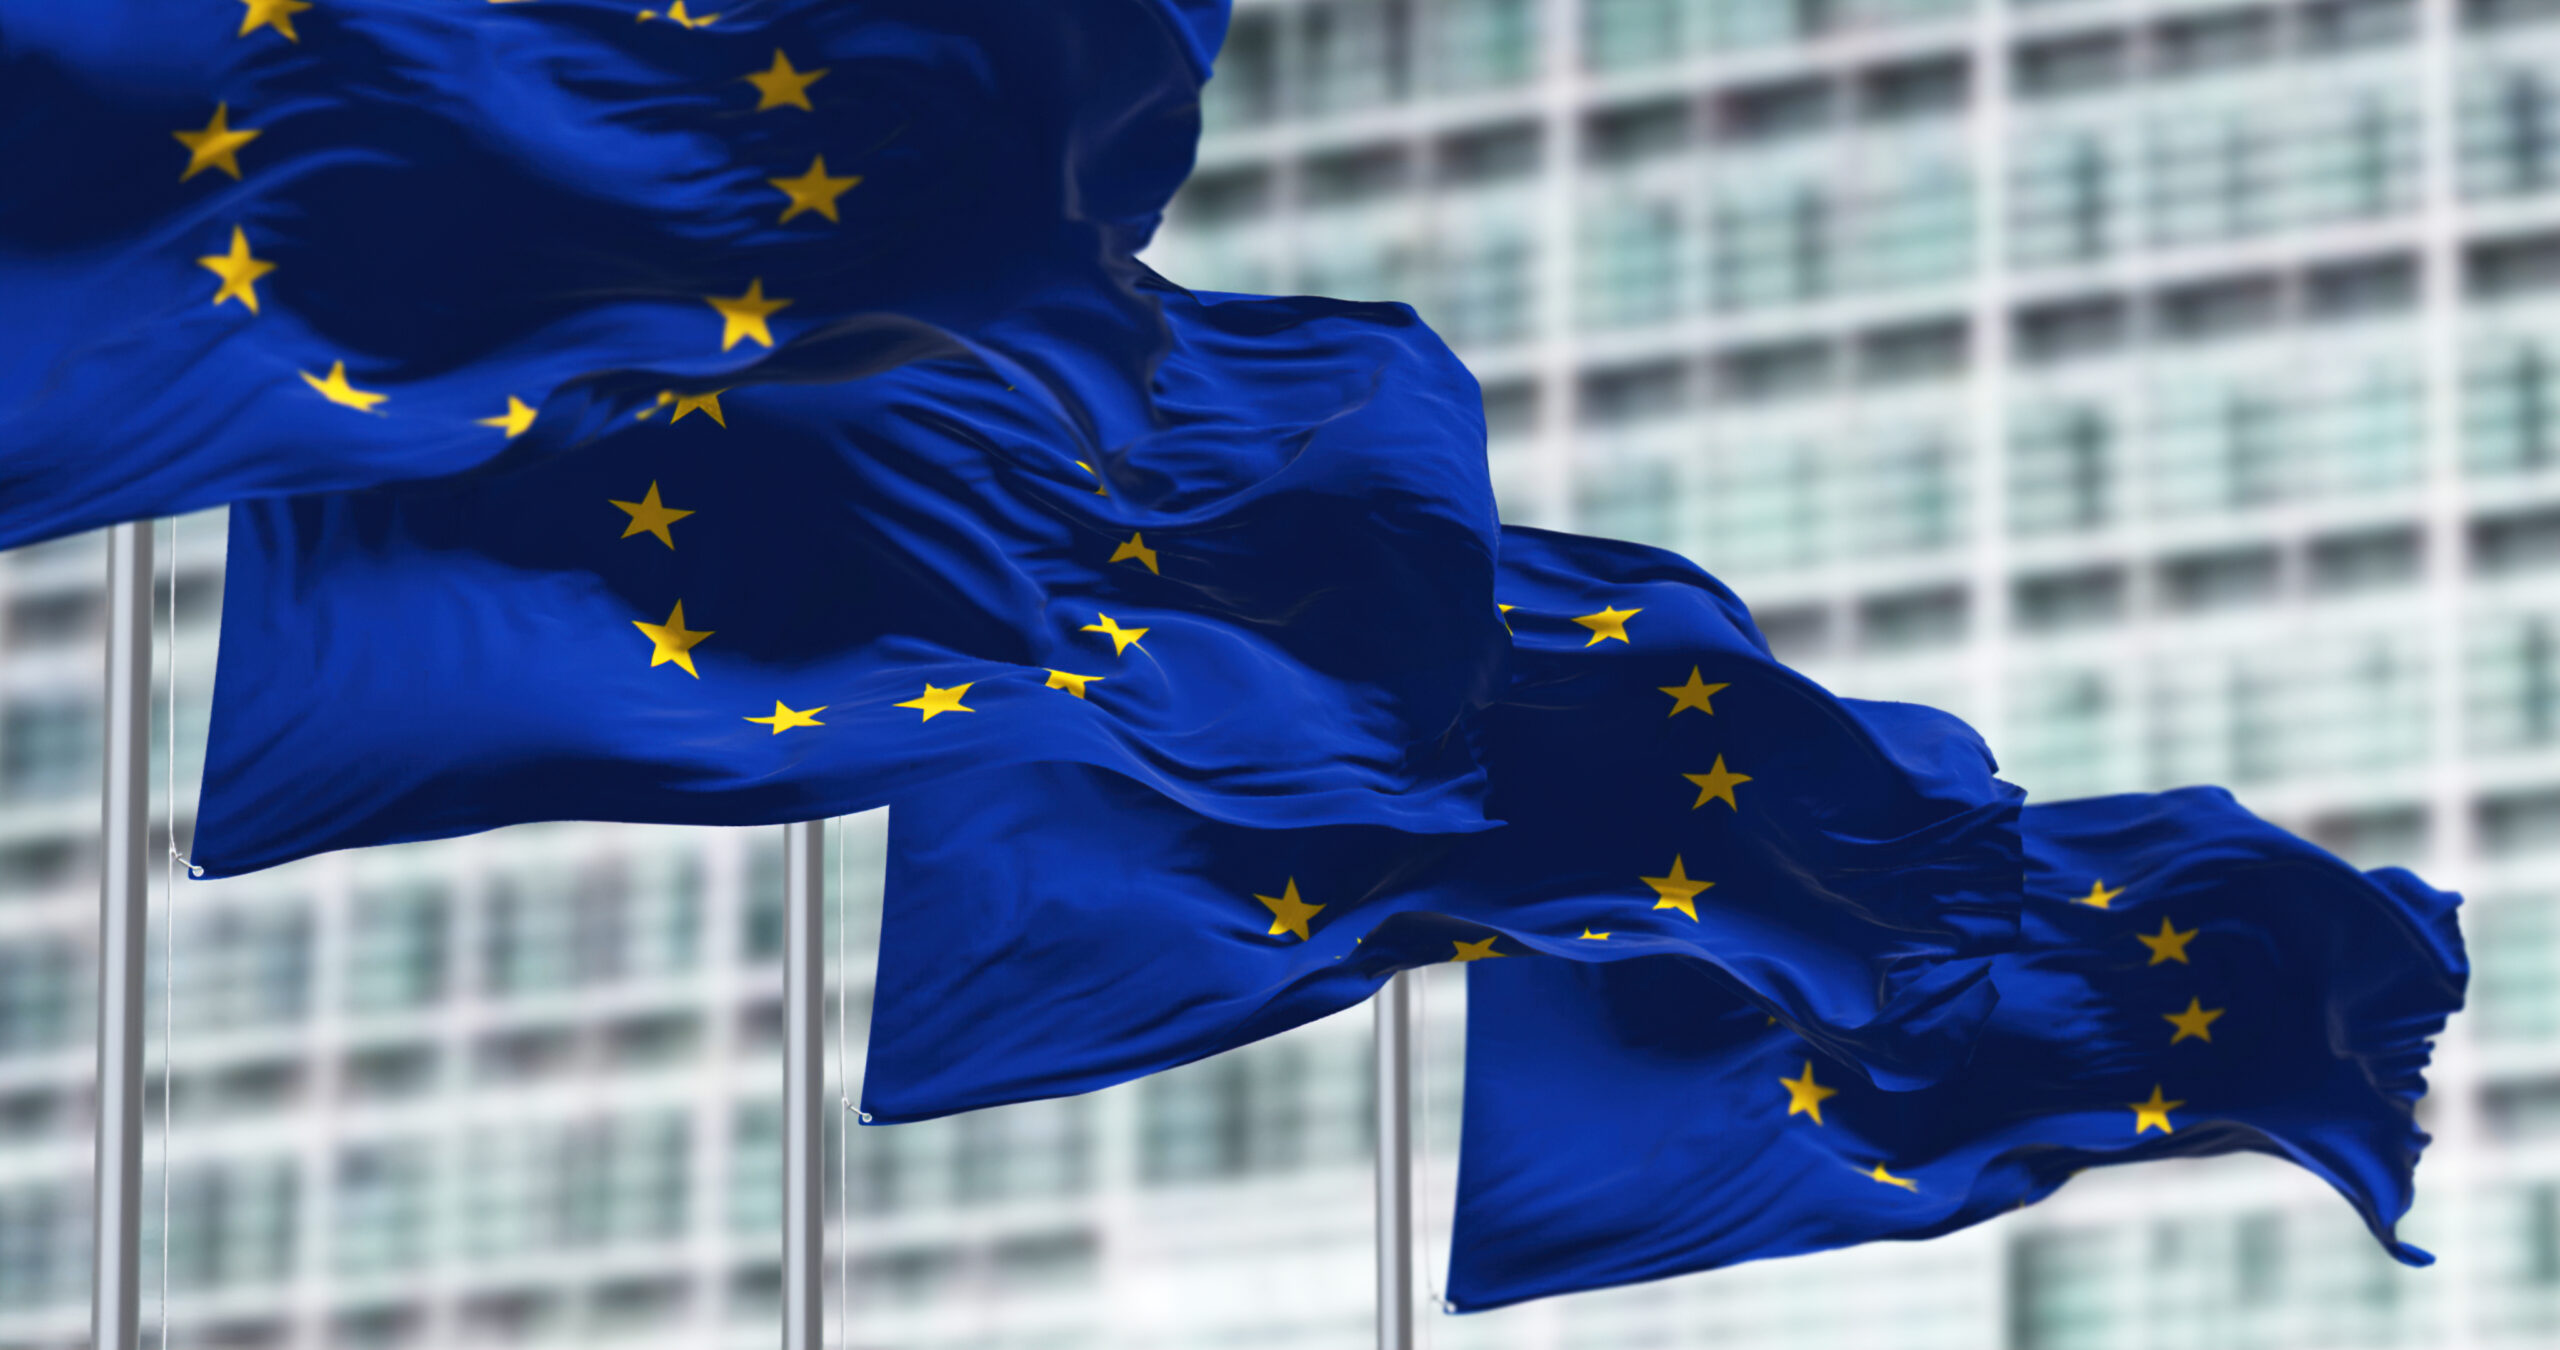 Analysis – EU Power Battle Could Hamper Proposed Safeguards for Financial Products